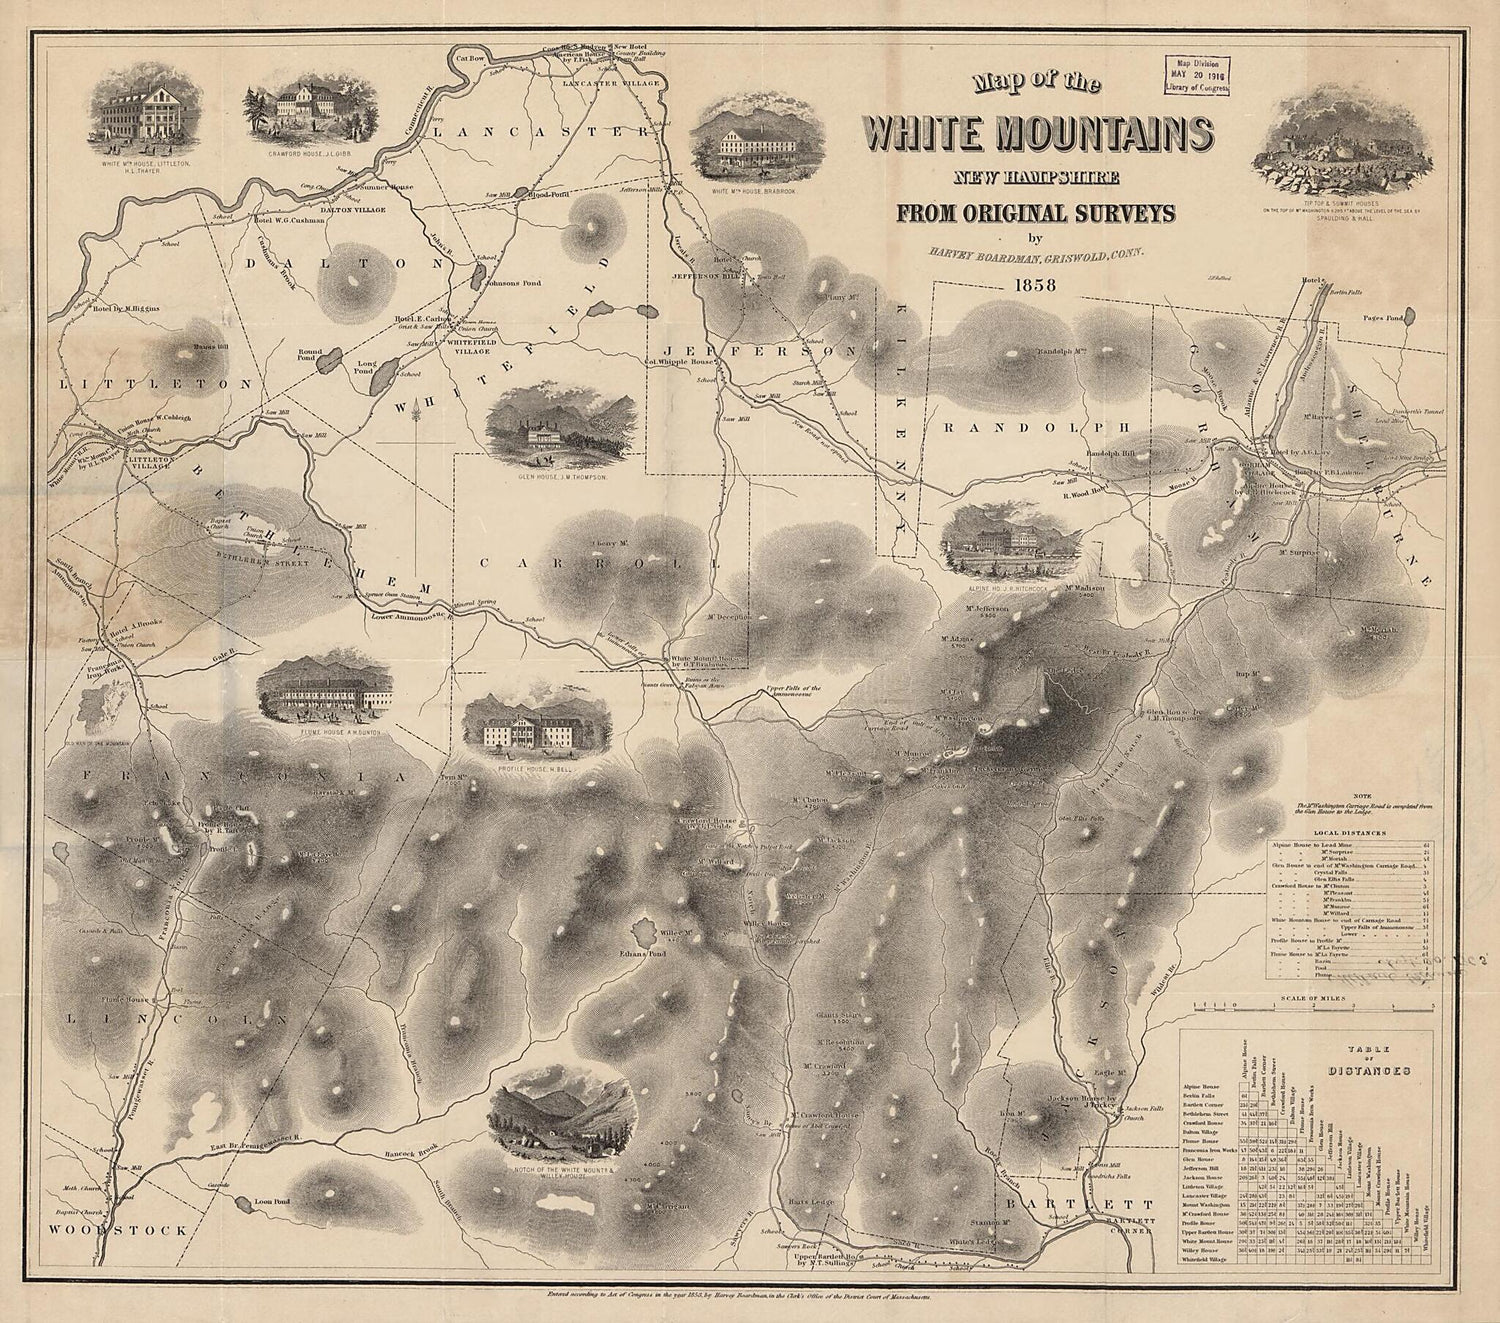 This old map of Map of the White Mountains, New Hampshire from 1858 was created by Harvey Boardman in 1858